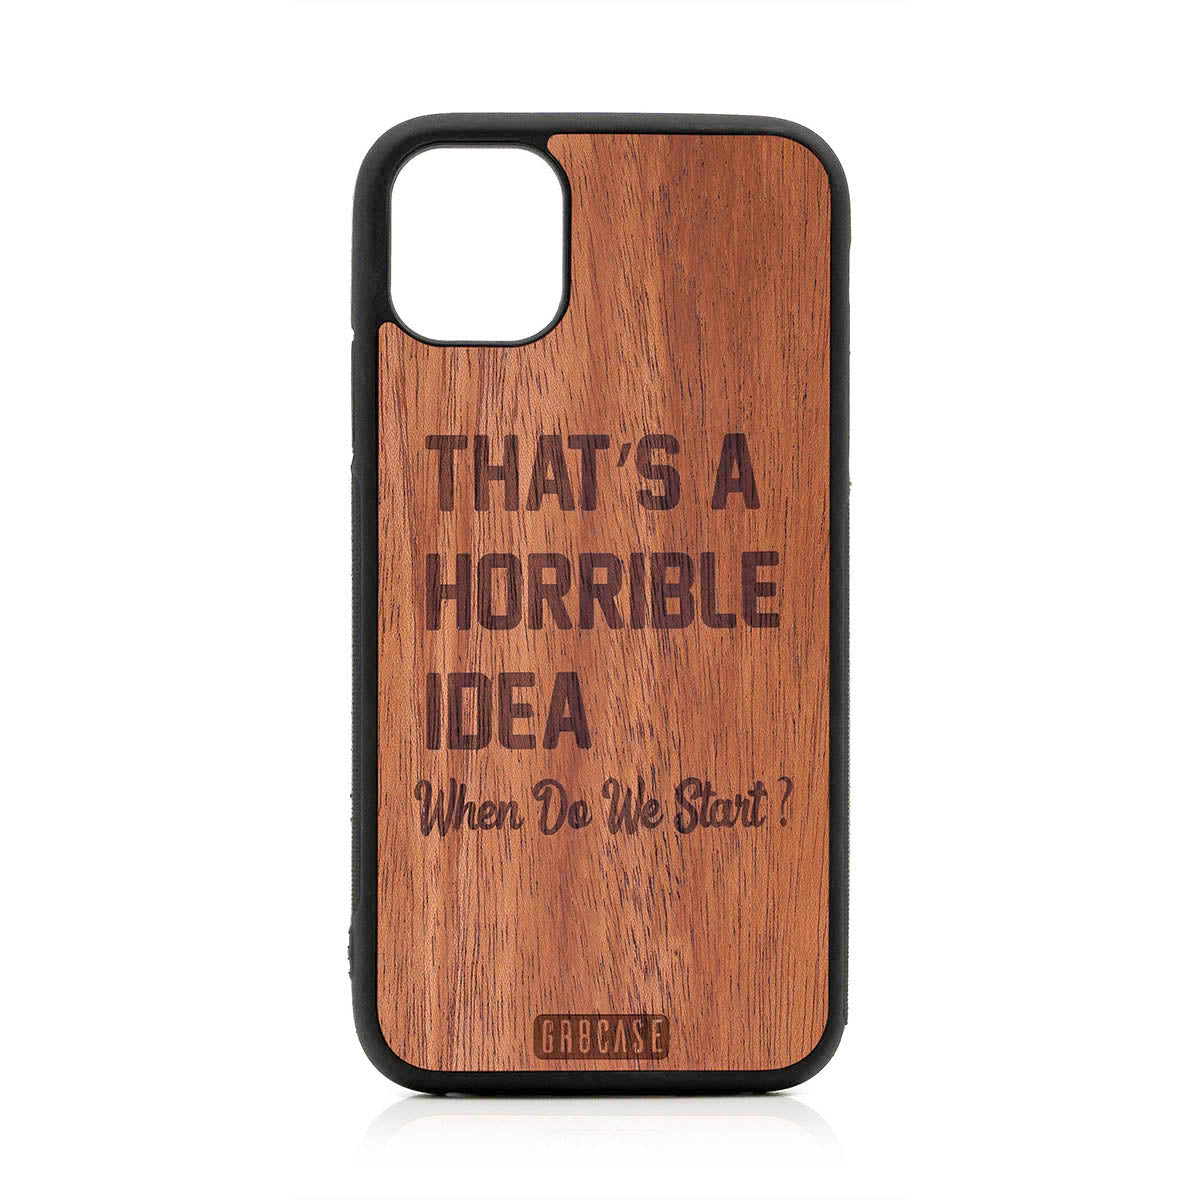 That's A Horrible idea When Do We Start? Design Wood Case For iPhone 11